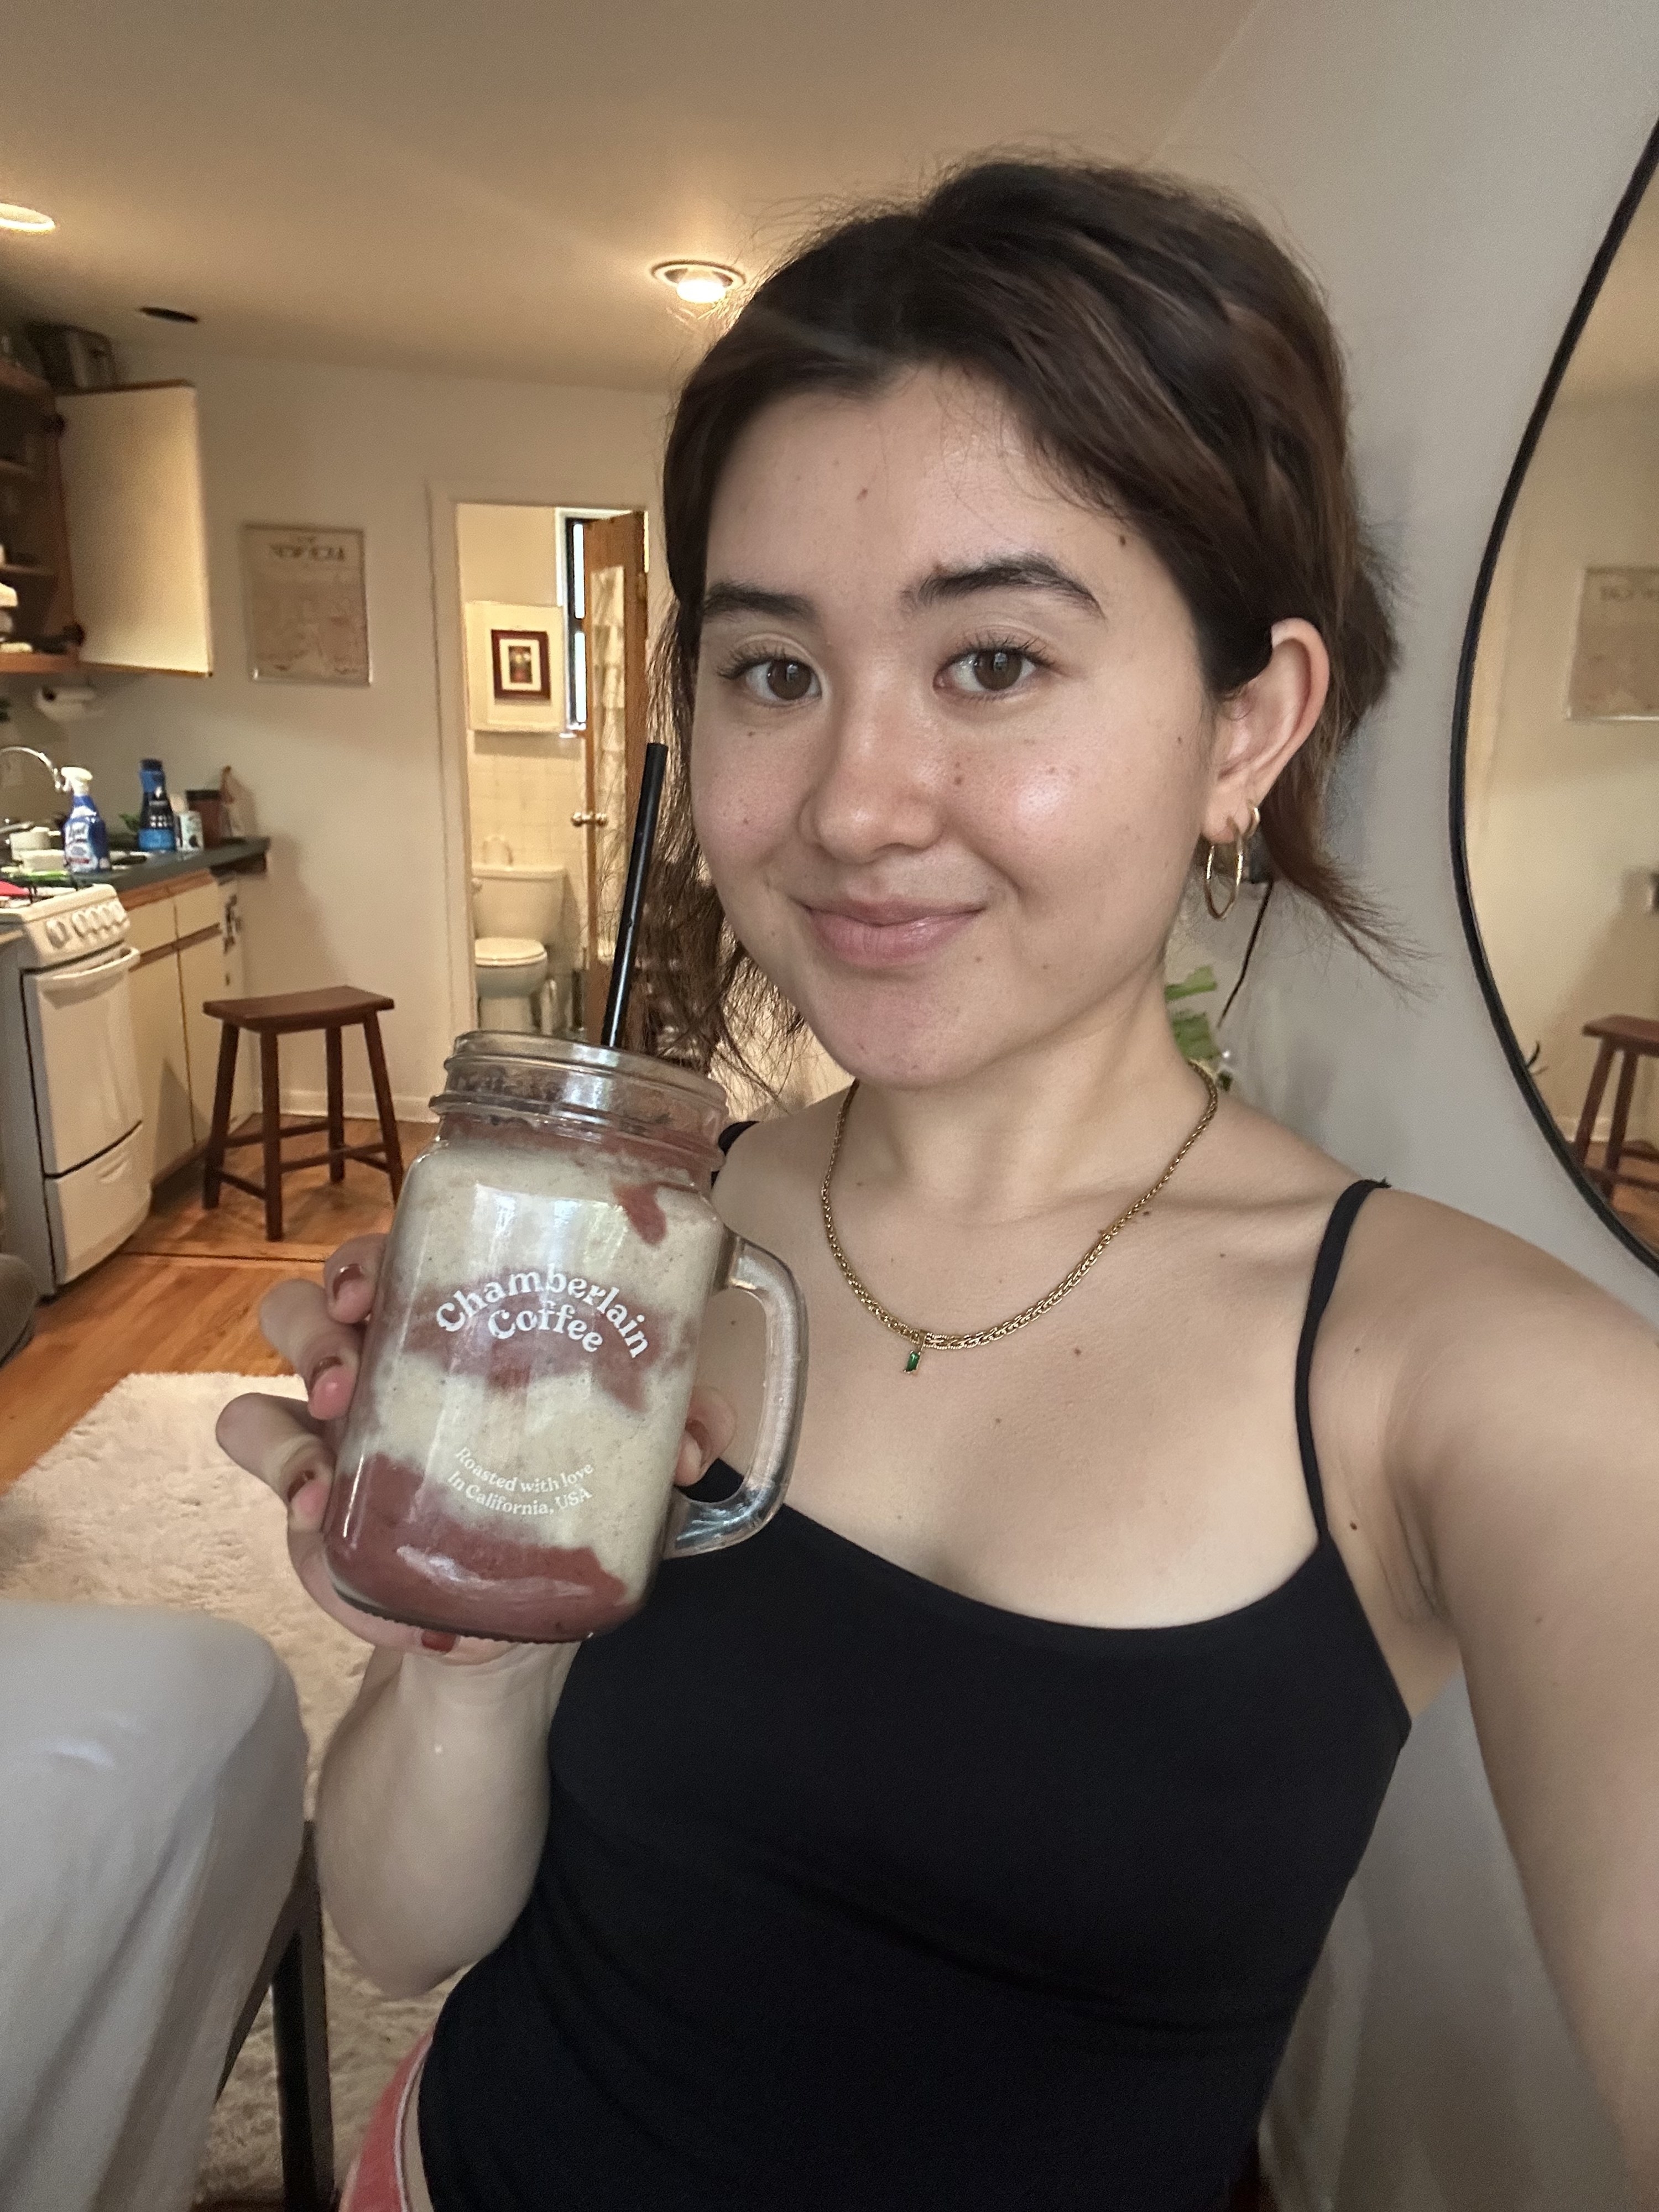 The author of the post holds the smoothie in her hand